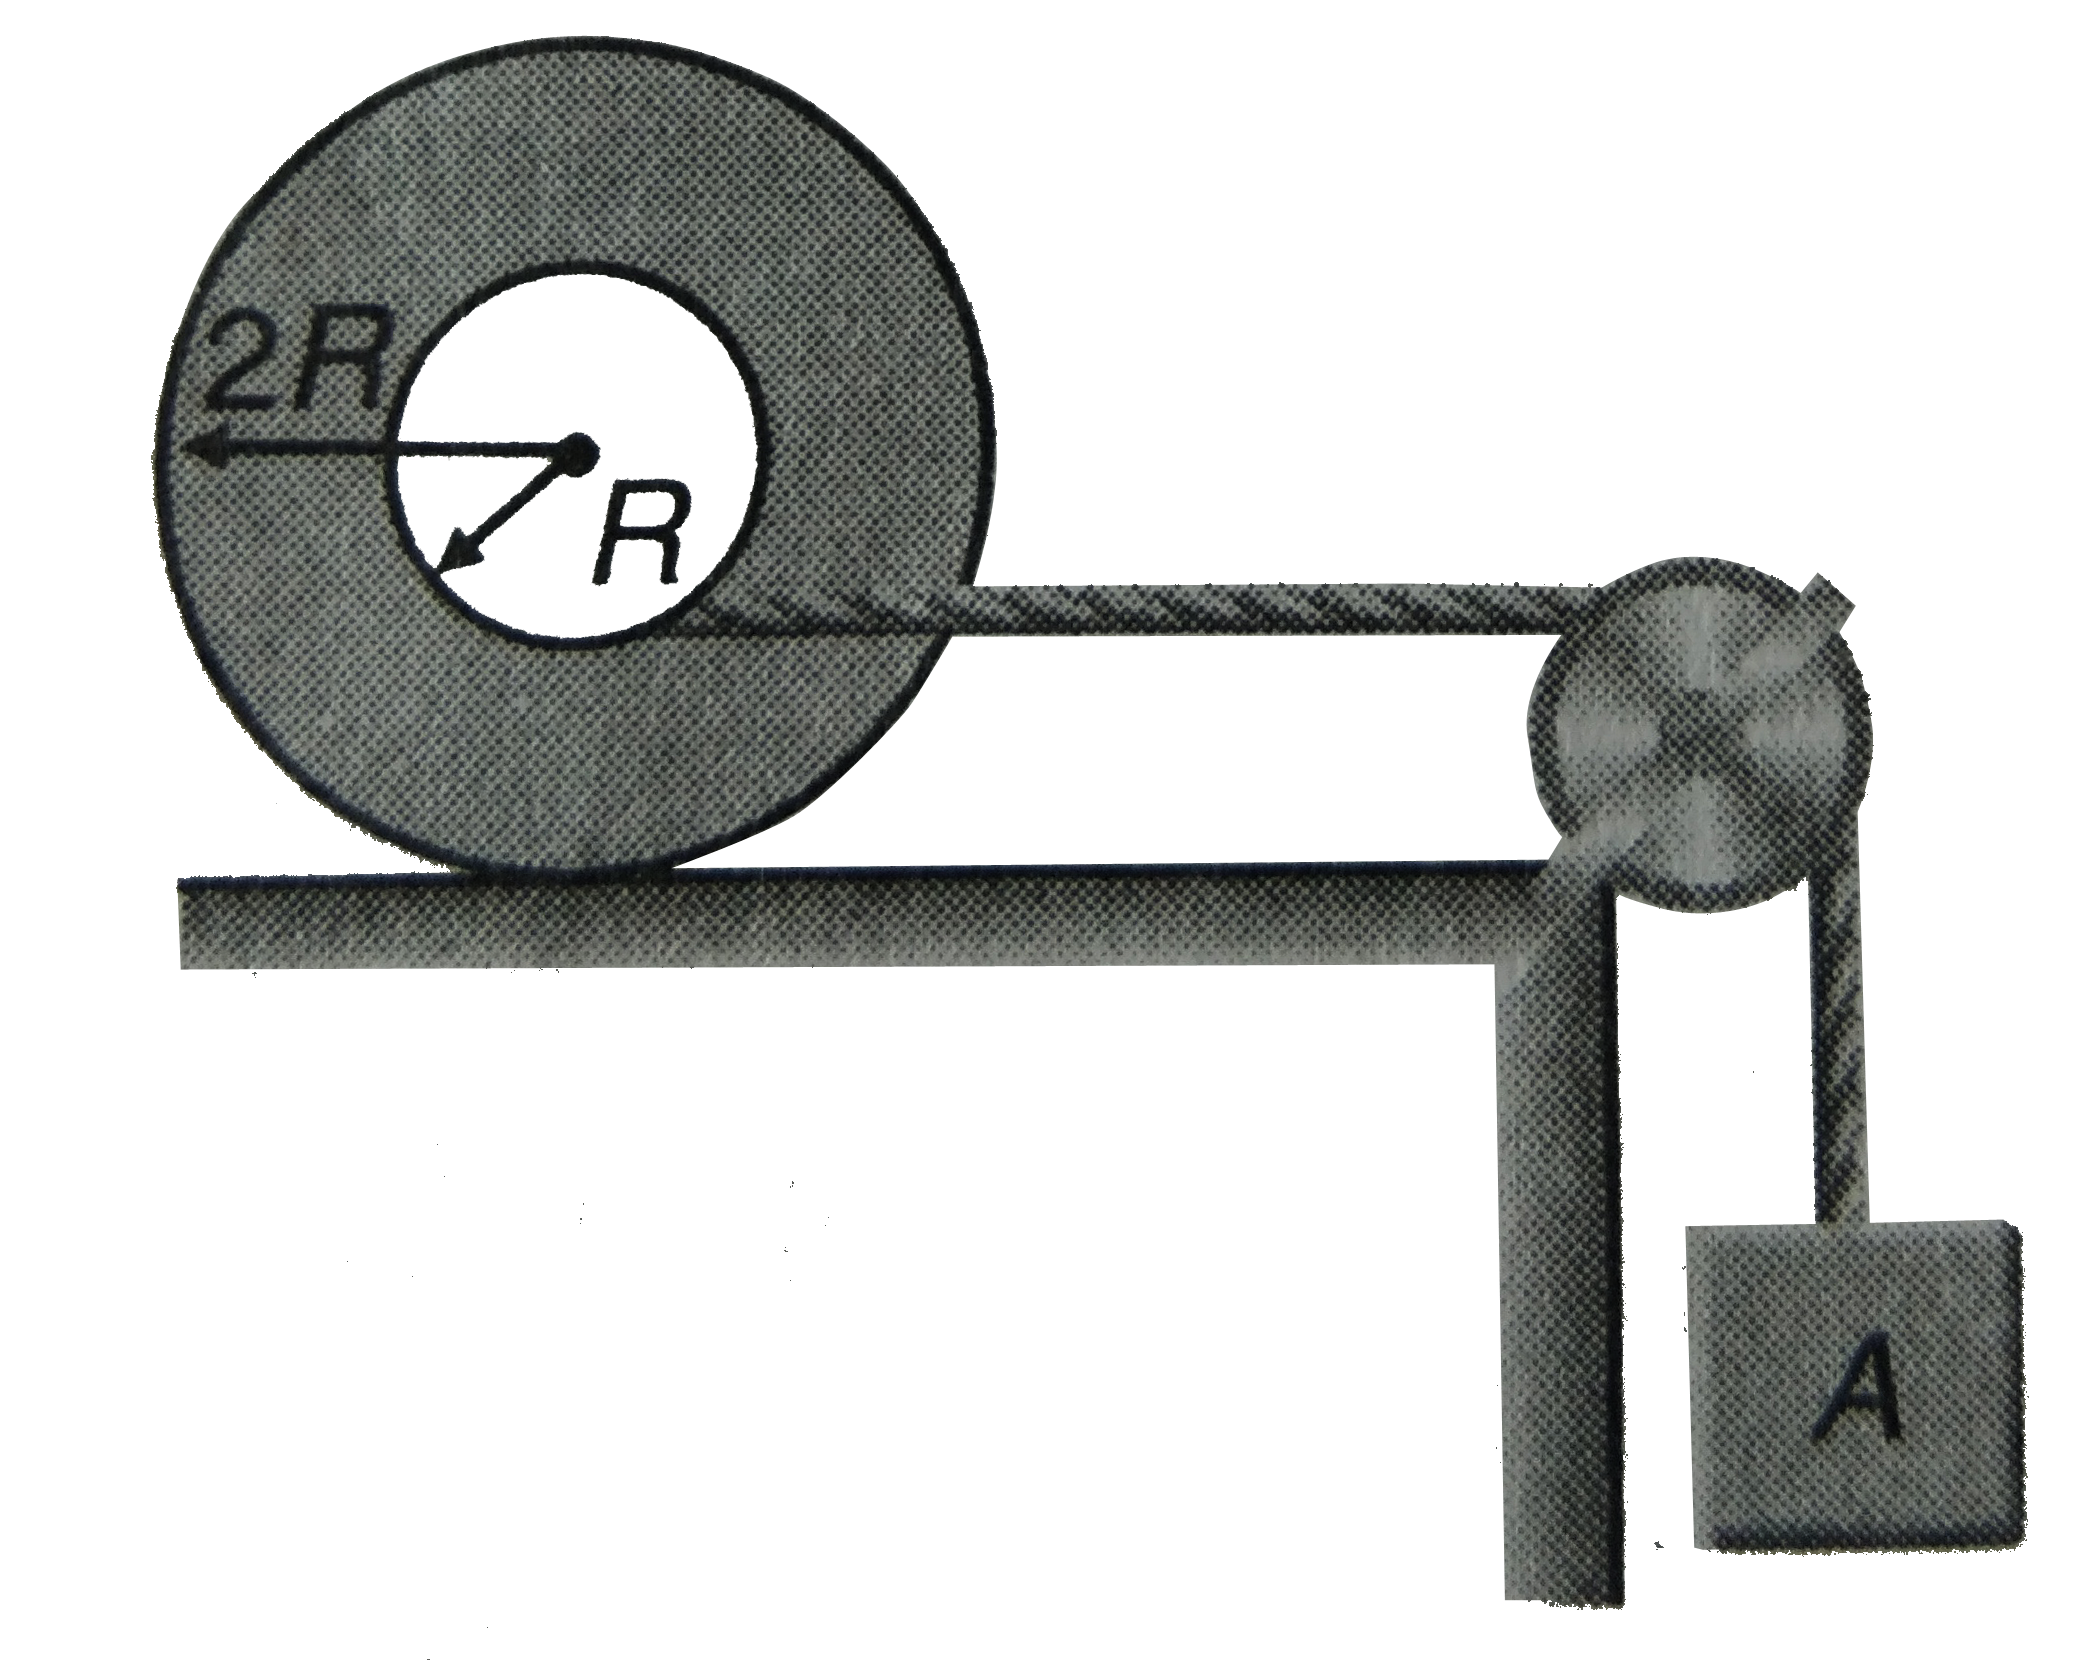 A thin massless thread is wound on a reel of mass 3 kg and moment of inertial 0.6 kg-m^(3) the hub radius is R=10cm and peripheral radius is 2R=20 cm the reel is placed on a rough table and the friction is enough to prevent slipping. find the acceleration of the centre of reel and of hanging mass of 1 kg.